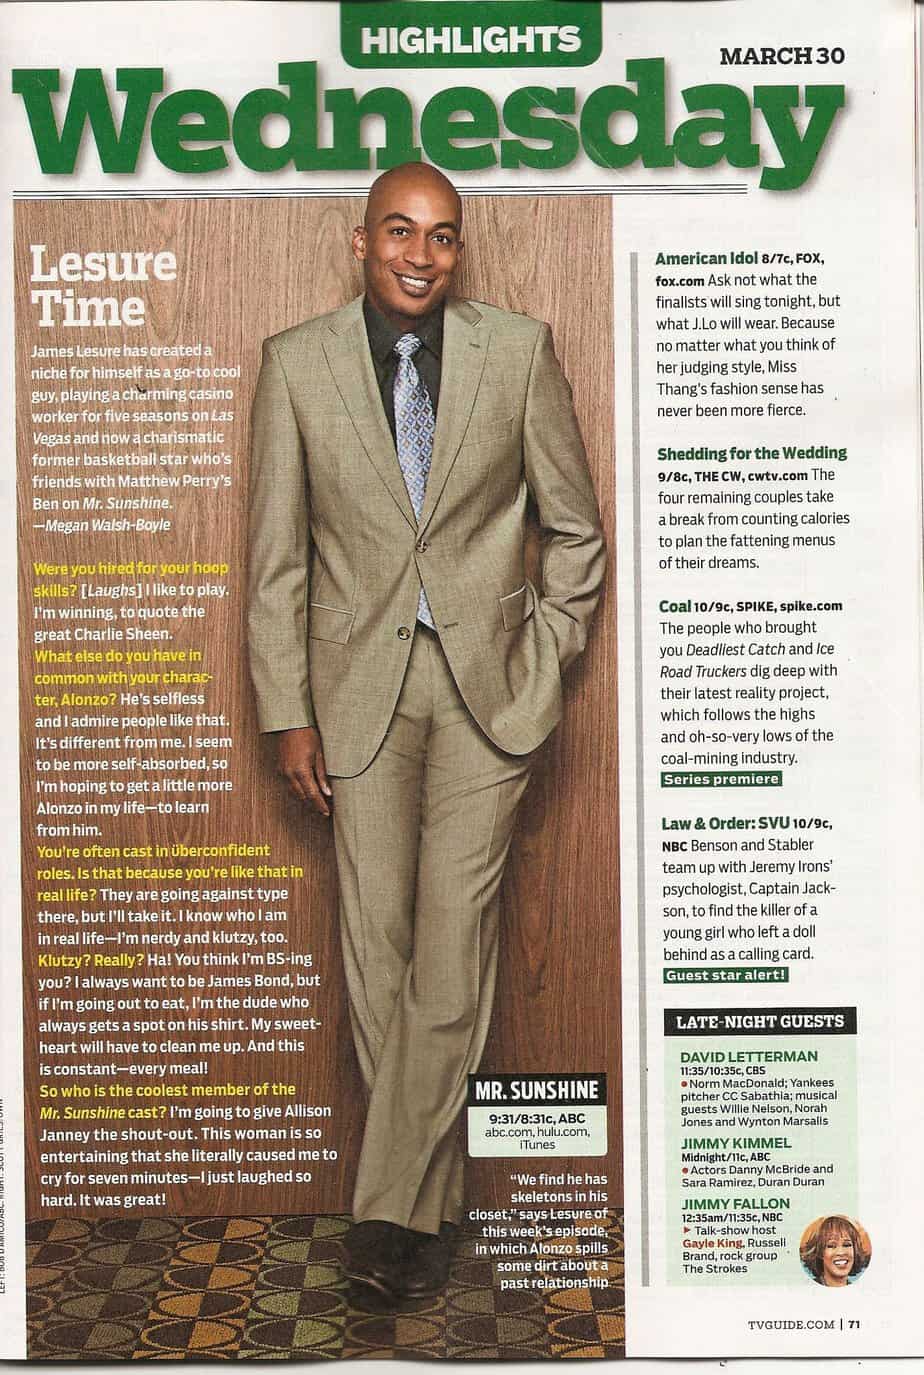 James Lesure has also been featured in the magazine Wednesday (source: Facebook)